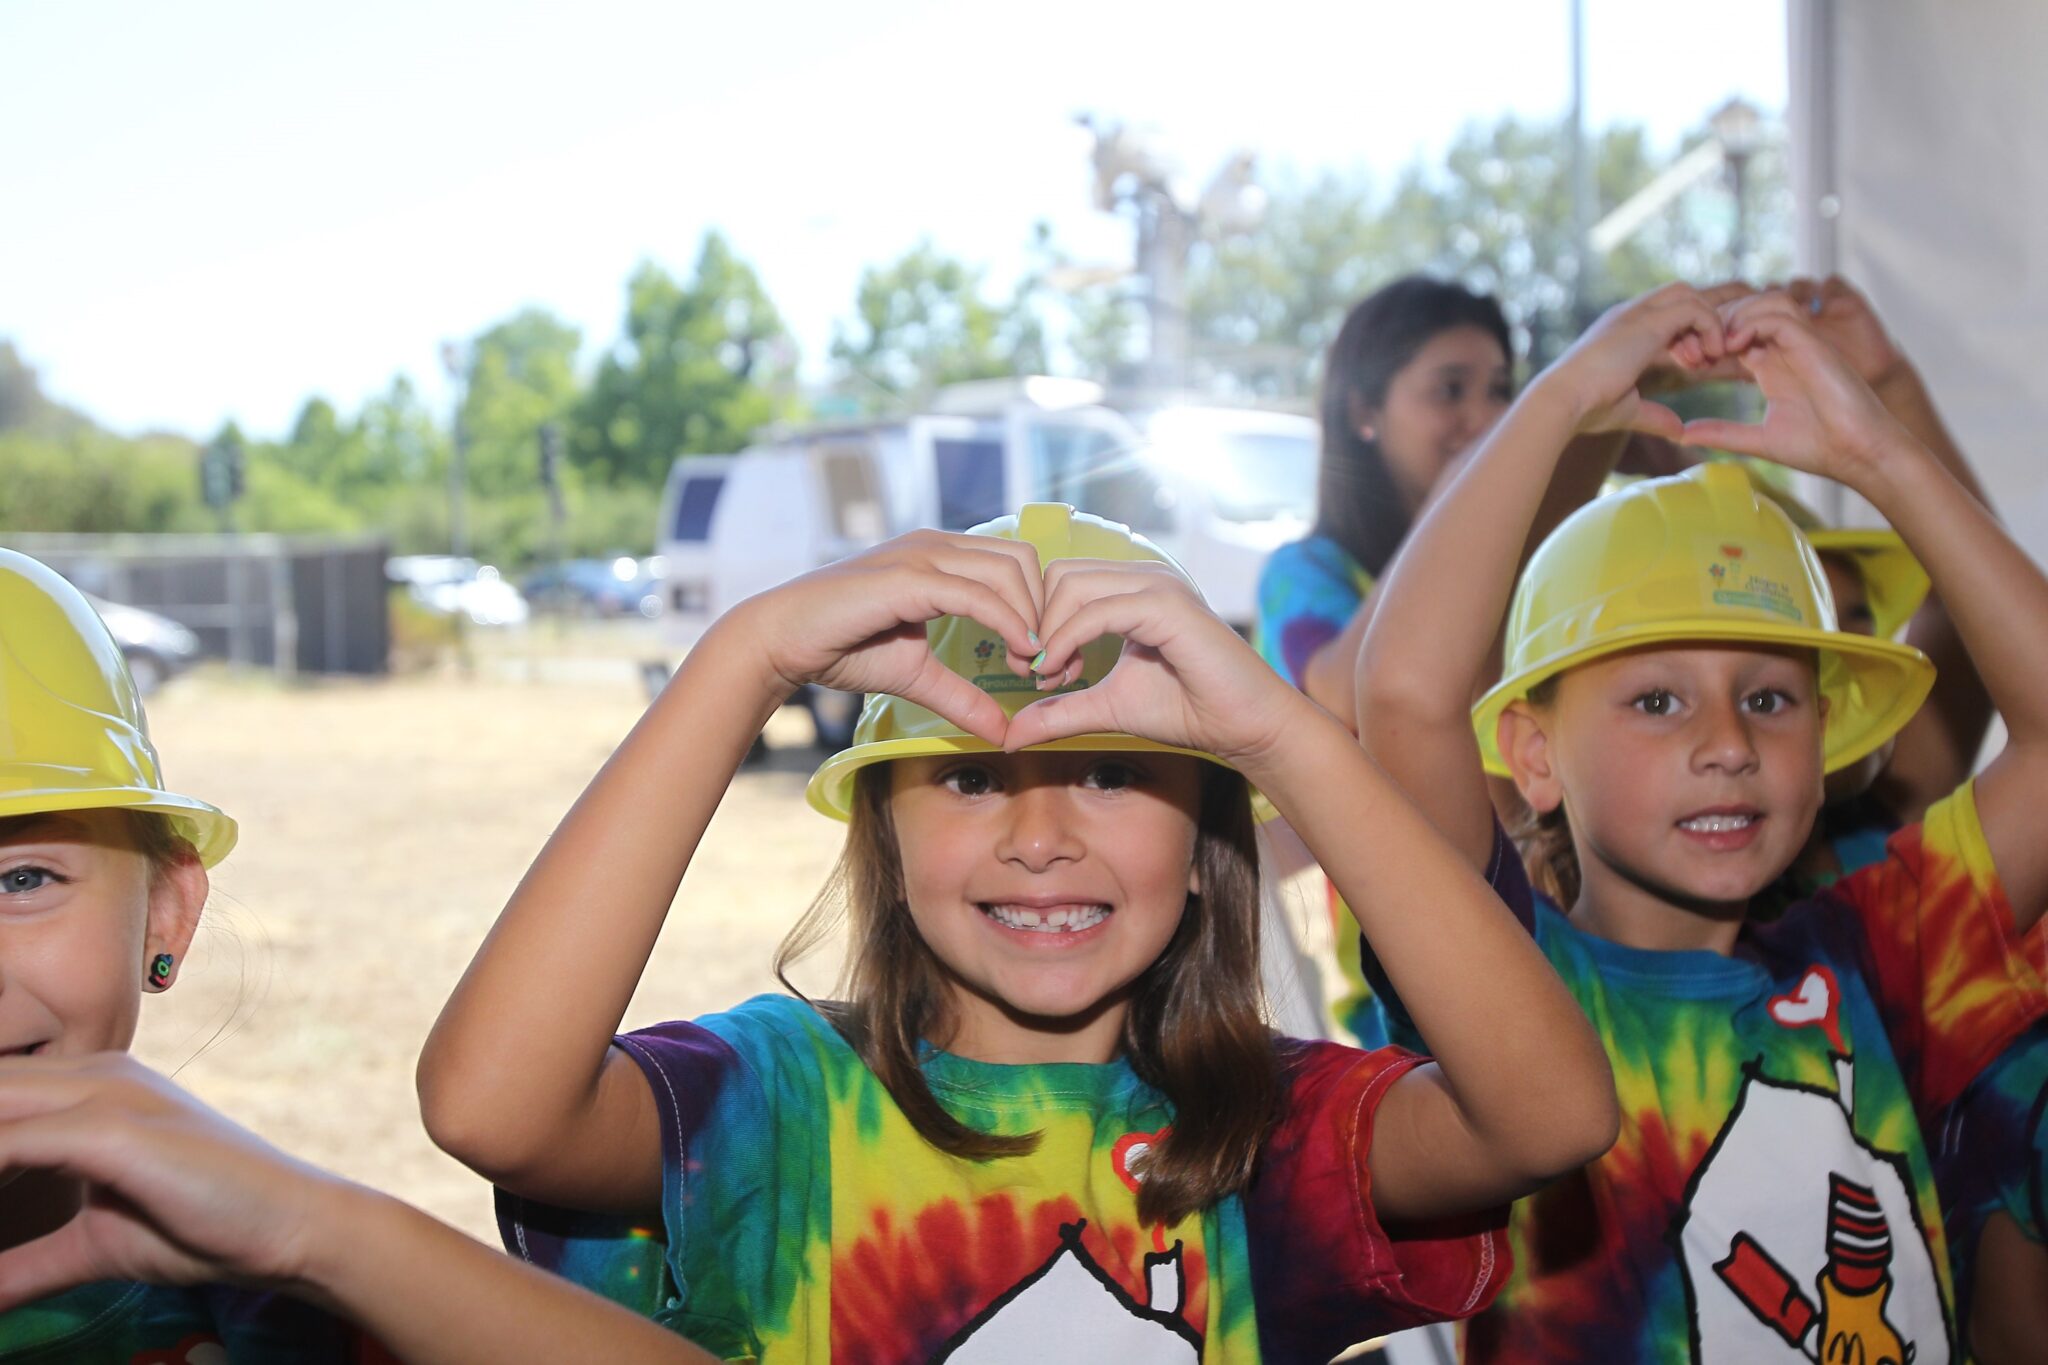 Kids making hearts with their hands wearing tie-dye shirts and hard hats.